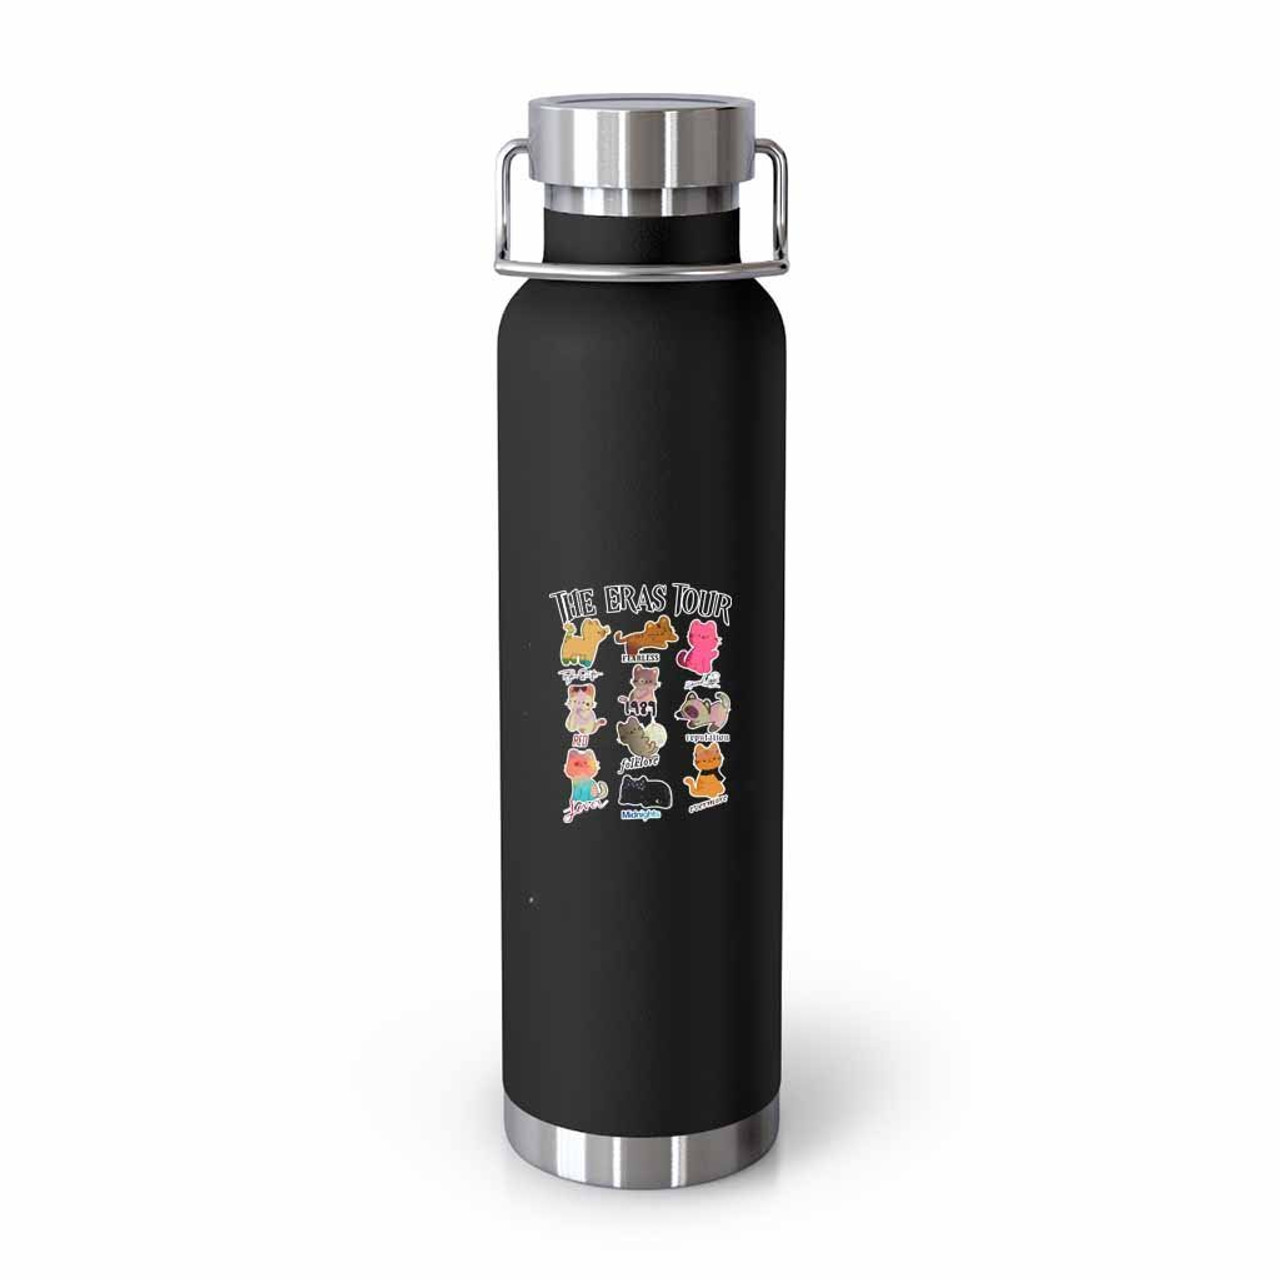 2023 Taylor Swift The Eras Tour Water Bottle for Sale in Canyon Country, CA  - OfferUp